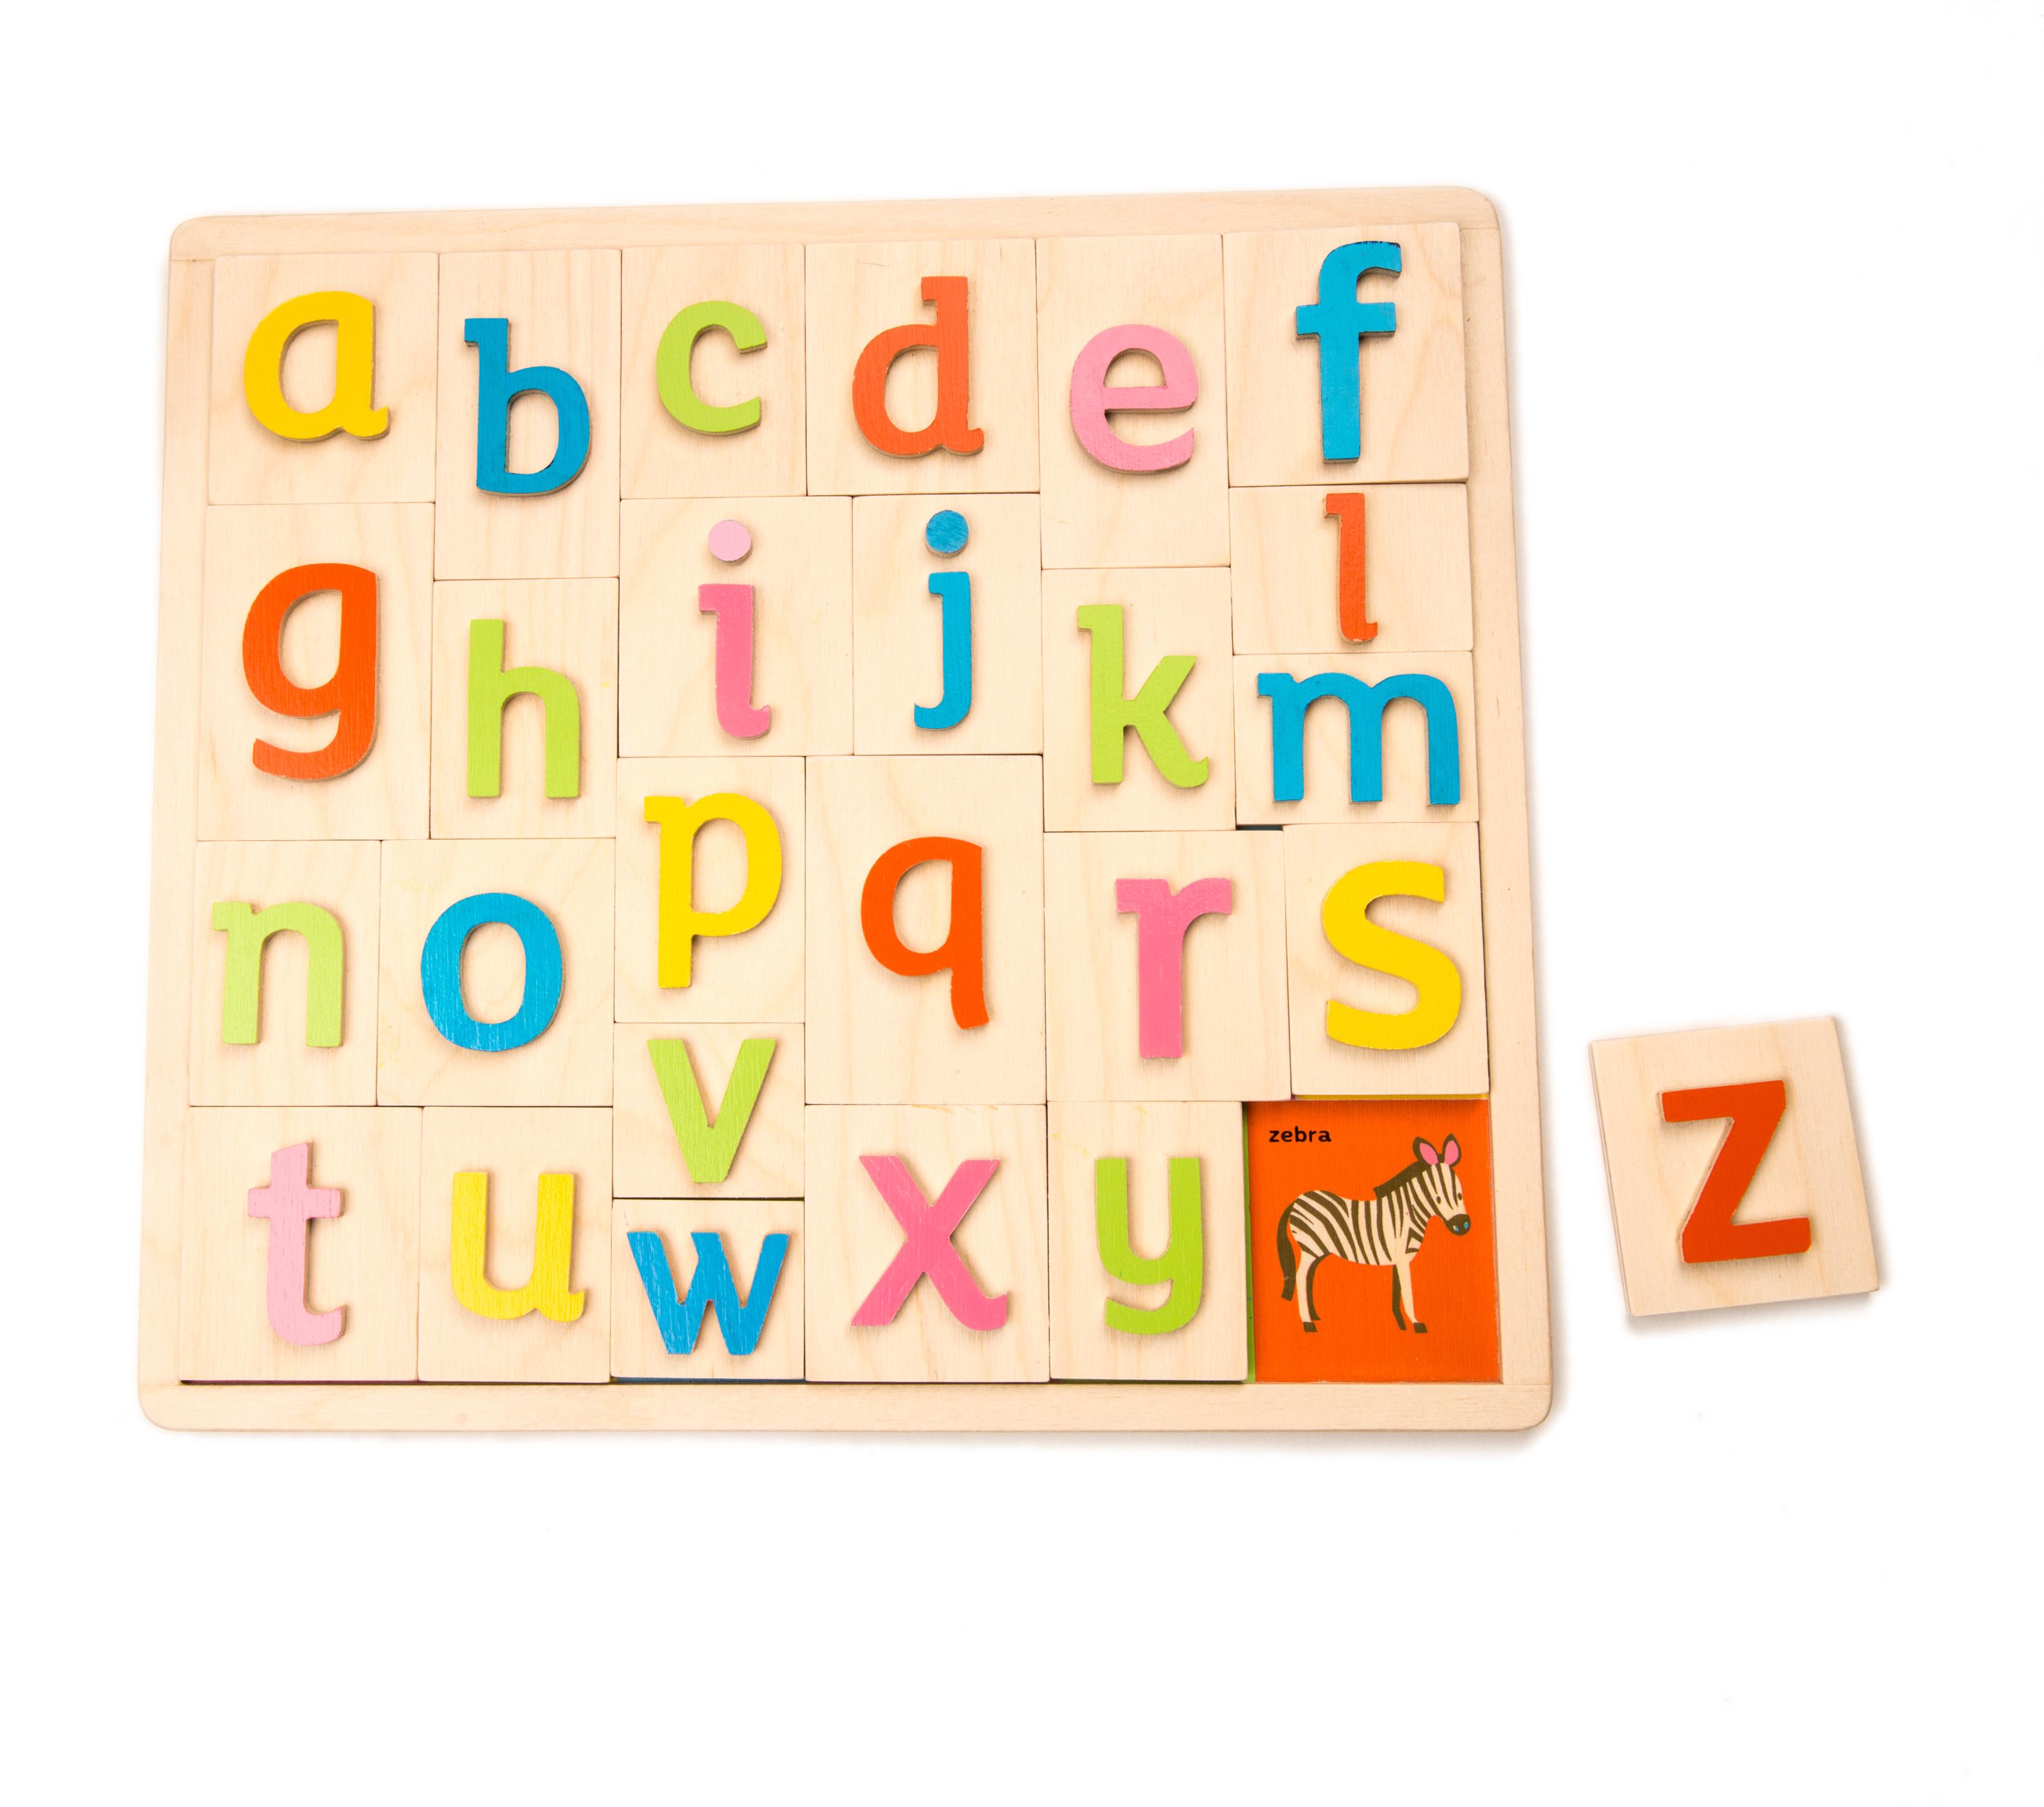 New Wood Alphabet Learning Puzzle with 26 Letters and Images #4